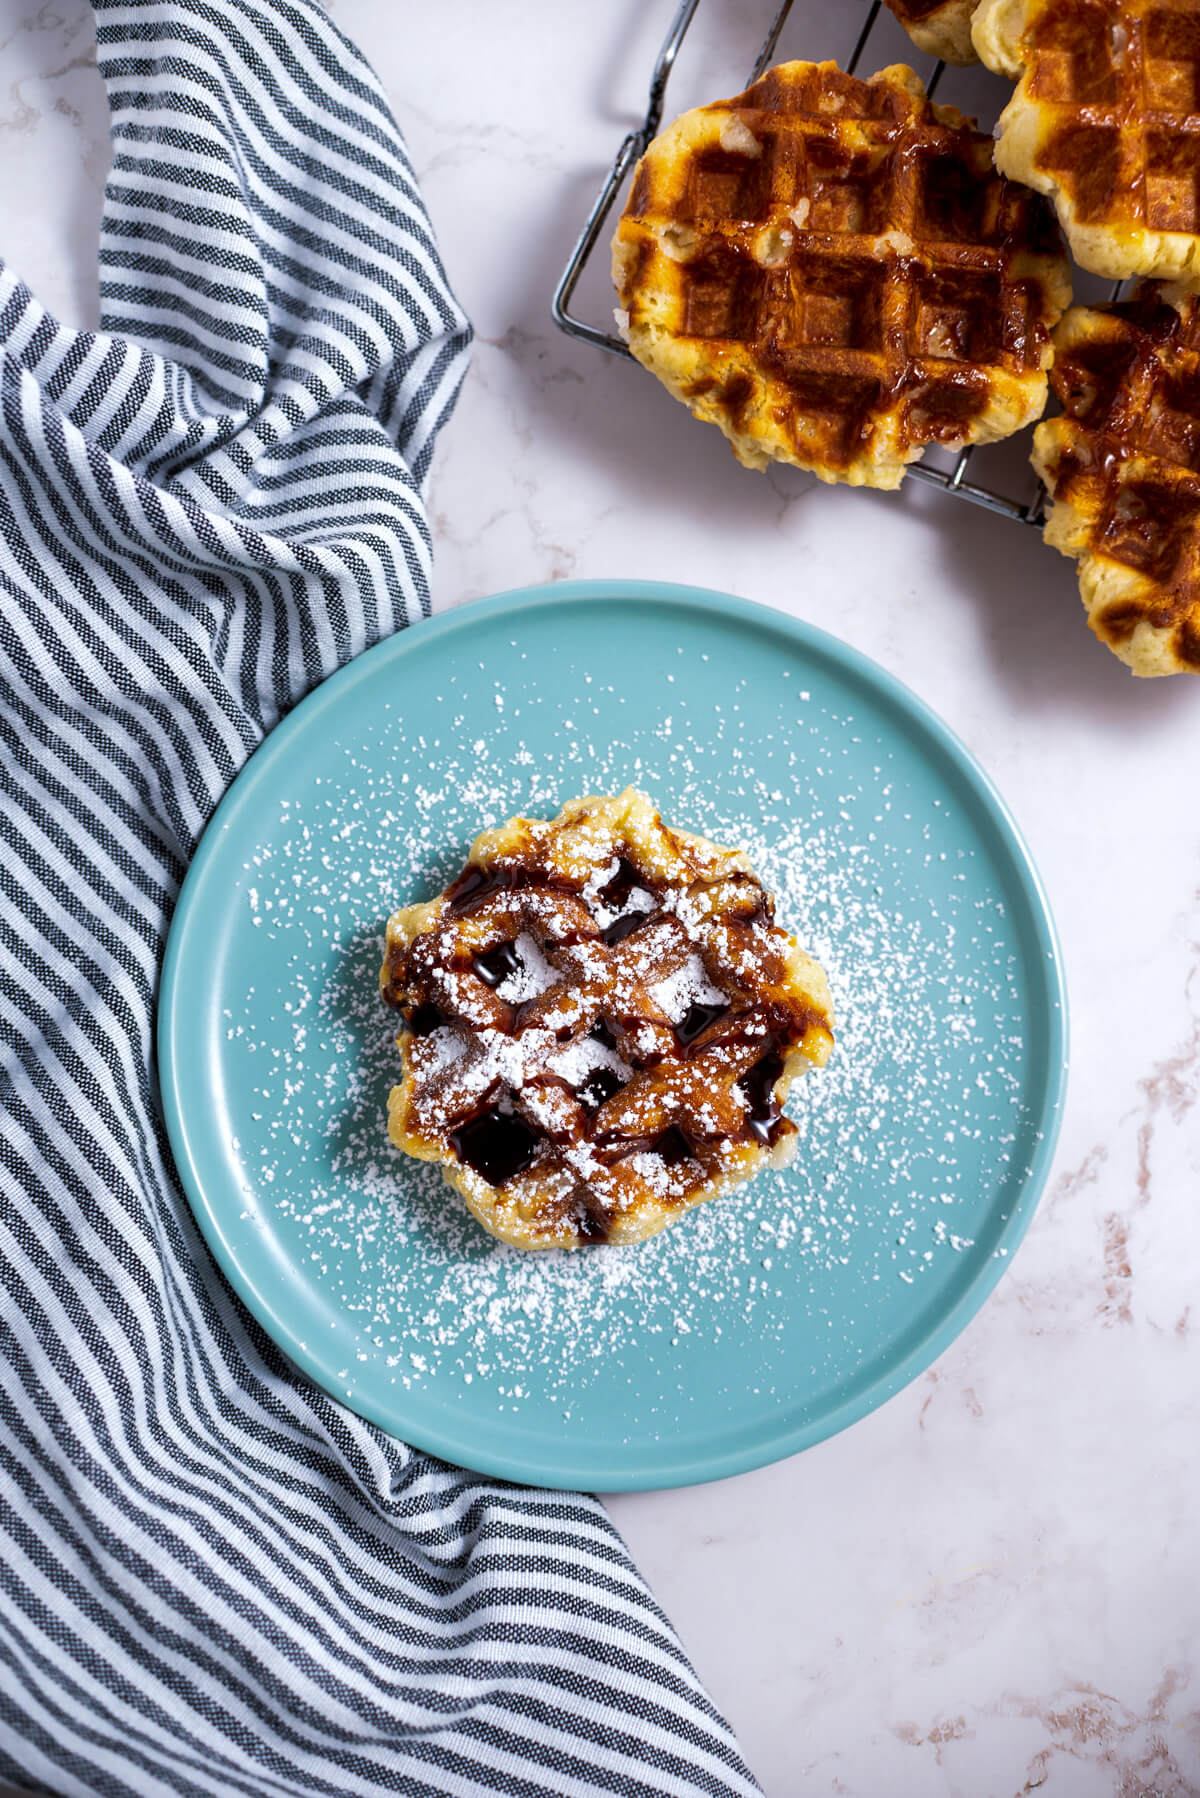 One Belgian Liège Waffle with confectioners' sugar and chocolate sauce sitting on a blue plate beside a stack of more waffles.